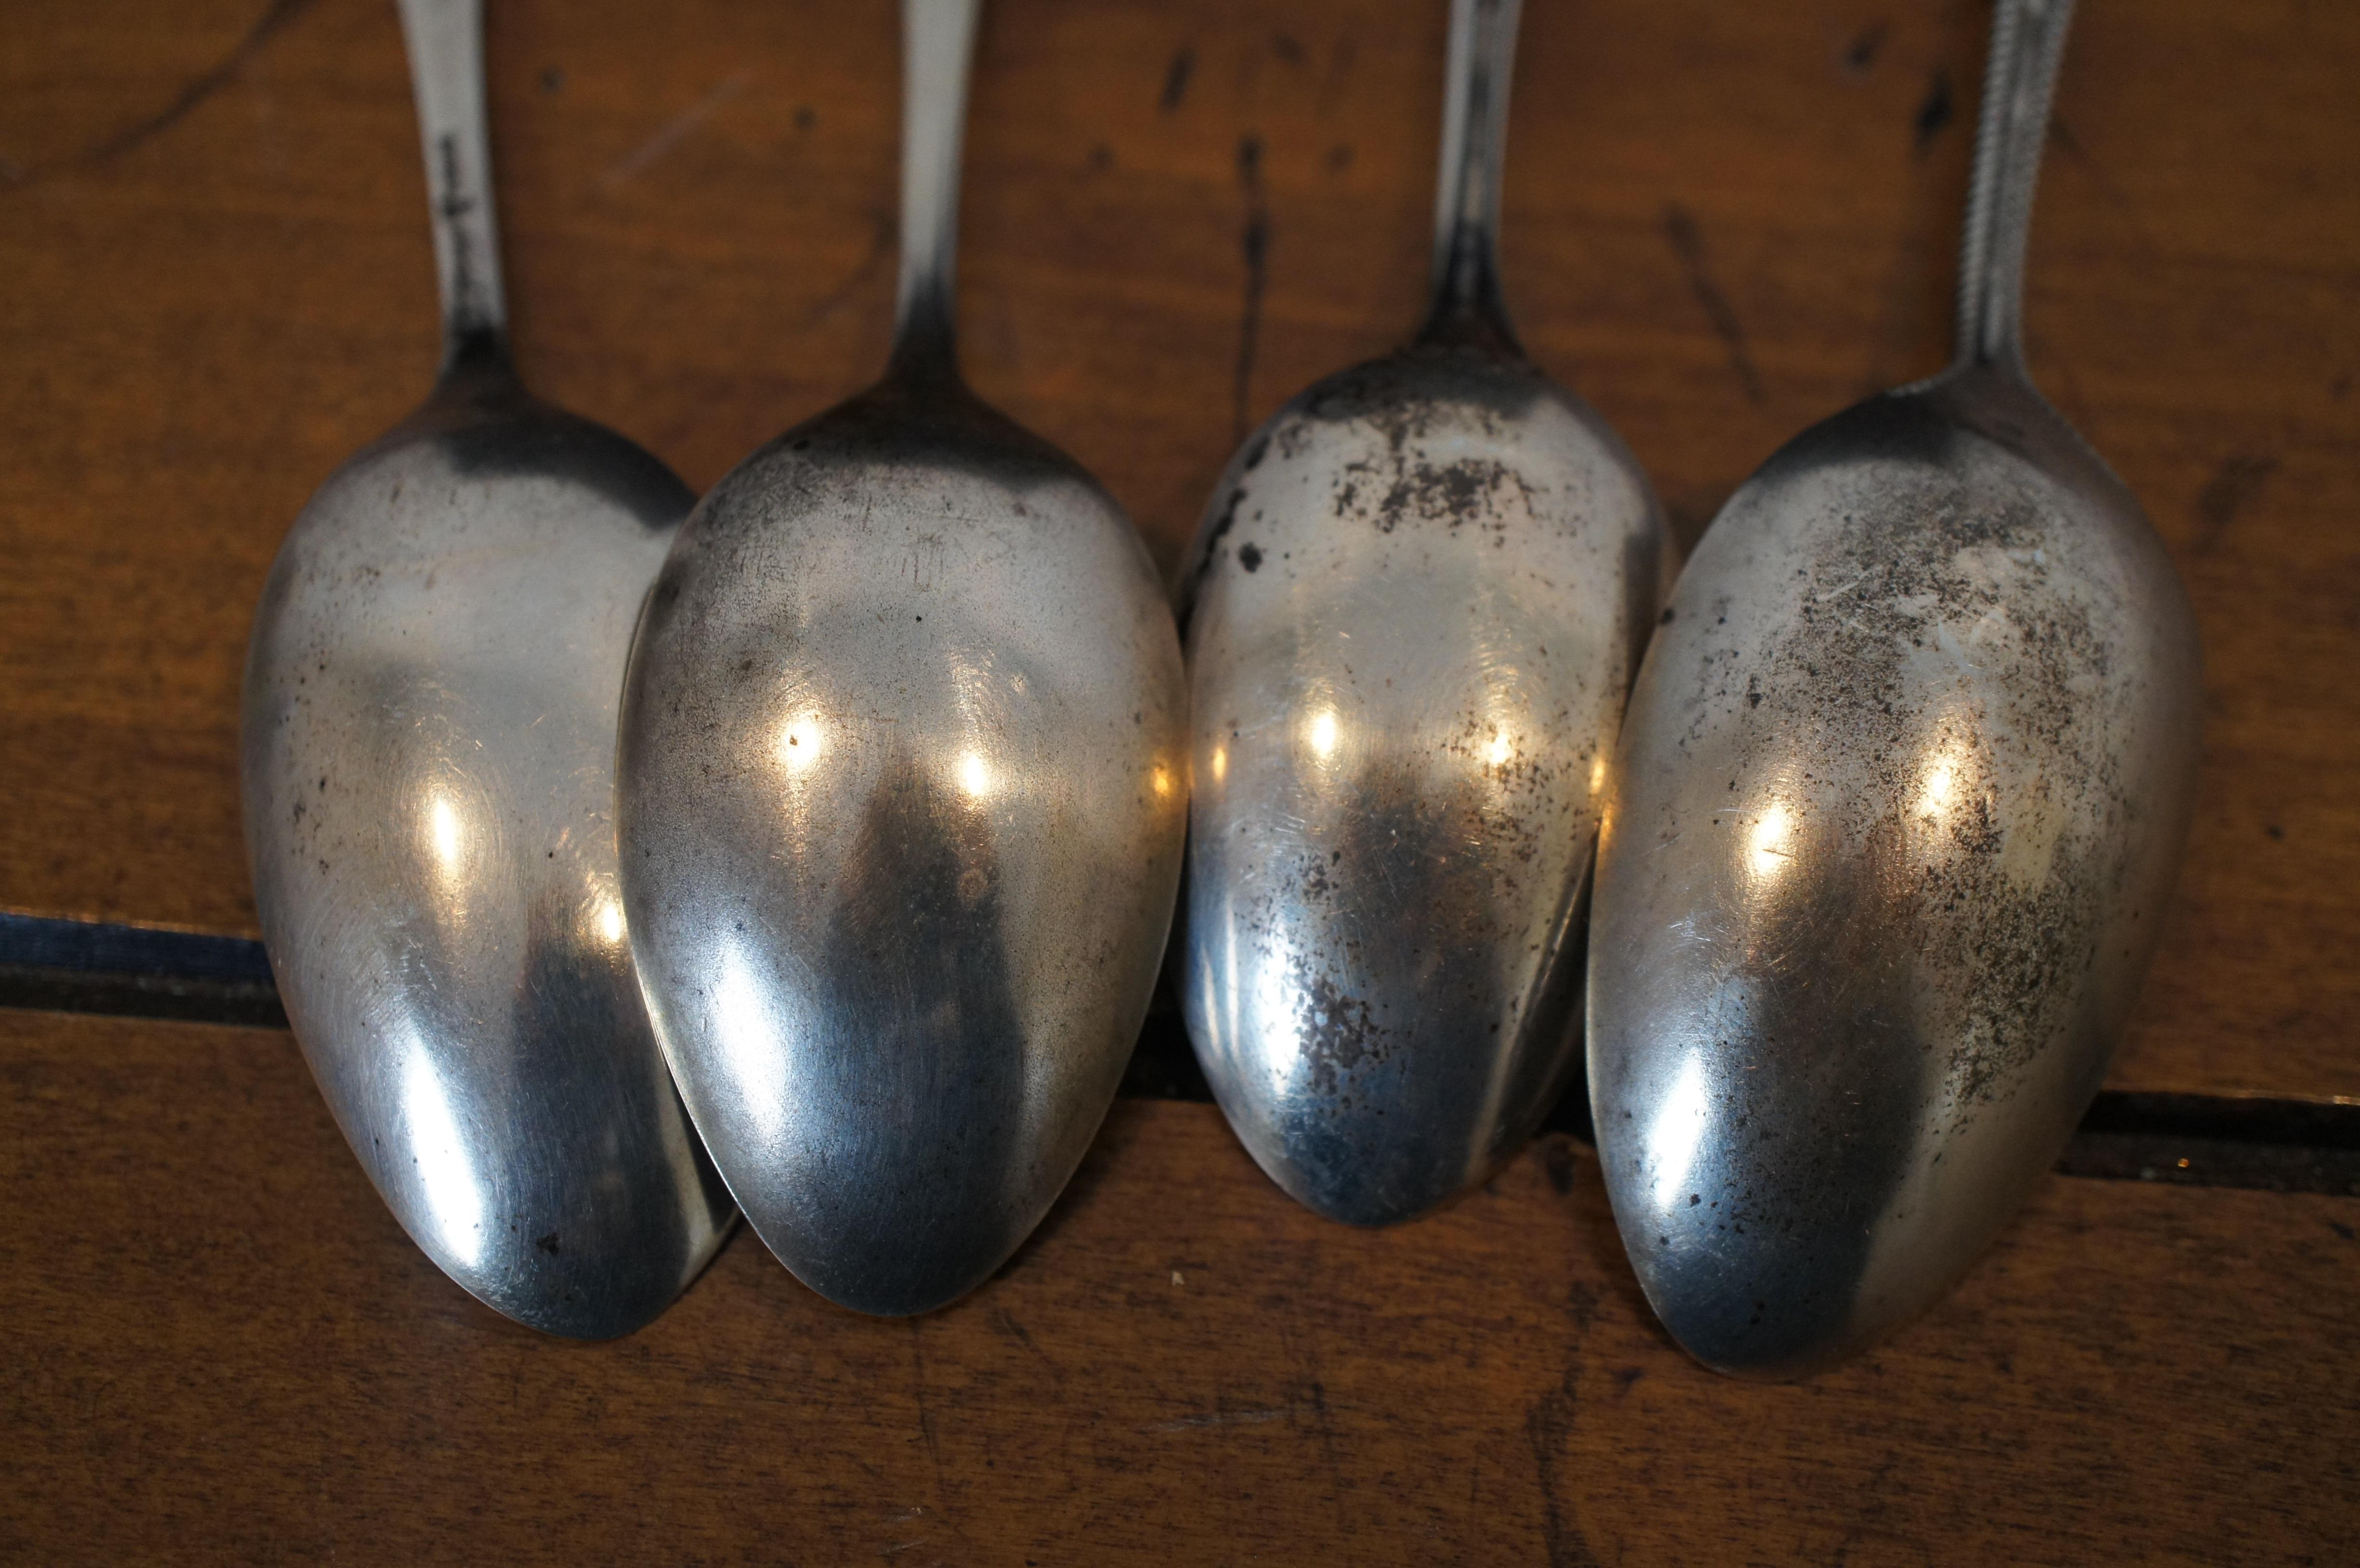 4 Antique Sterling Souvenir Spoons Gorham Lunt Mechanics Missouri Columbia In Good Condition For Sale In Dayton, OH